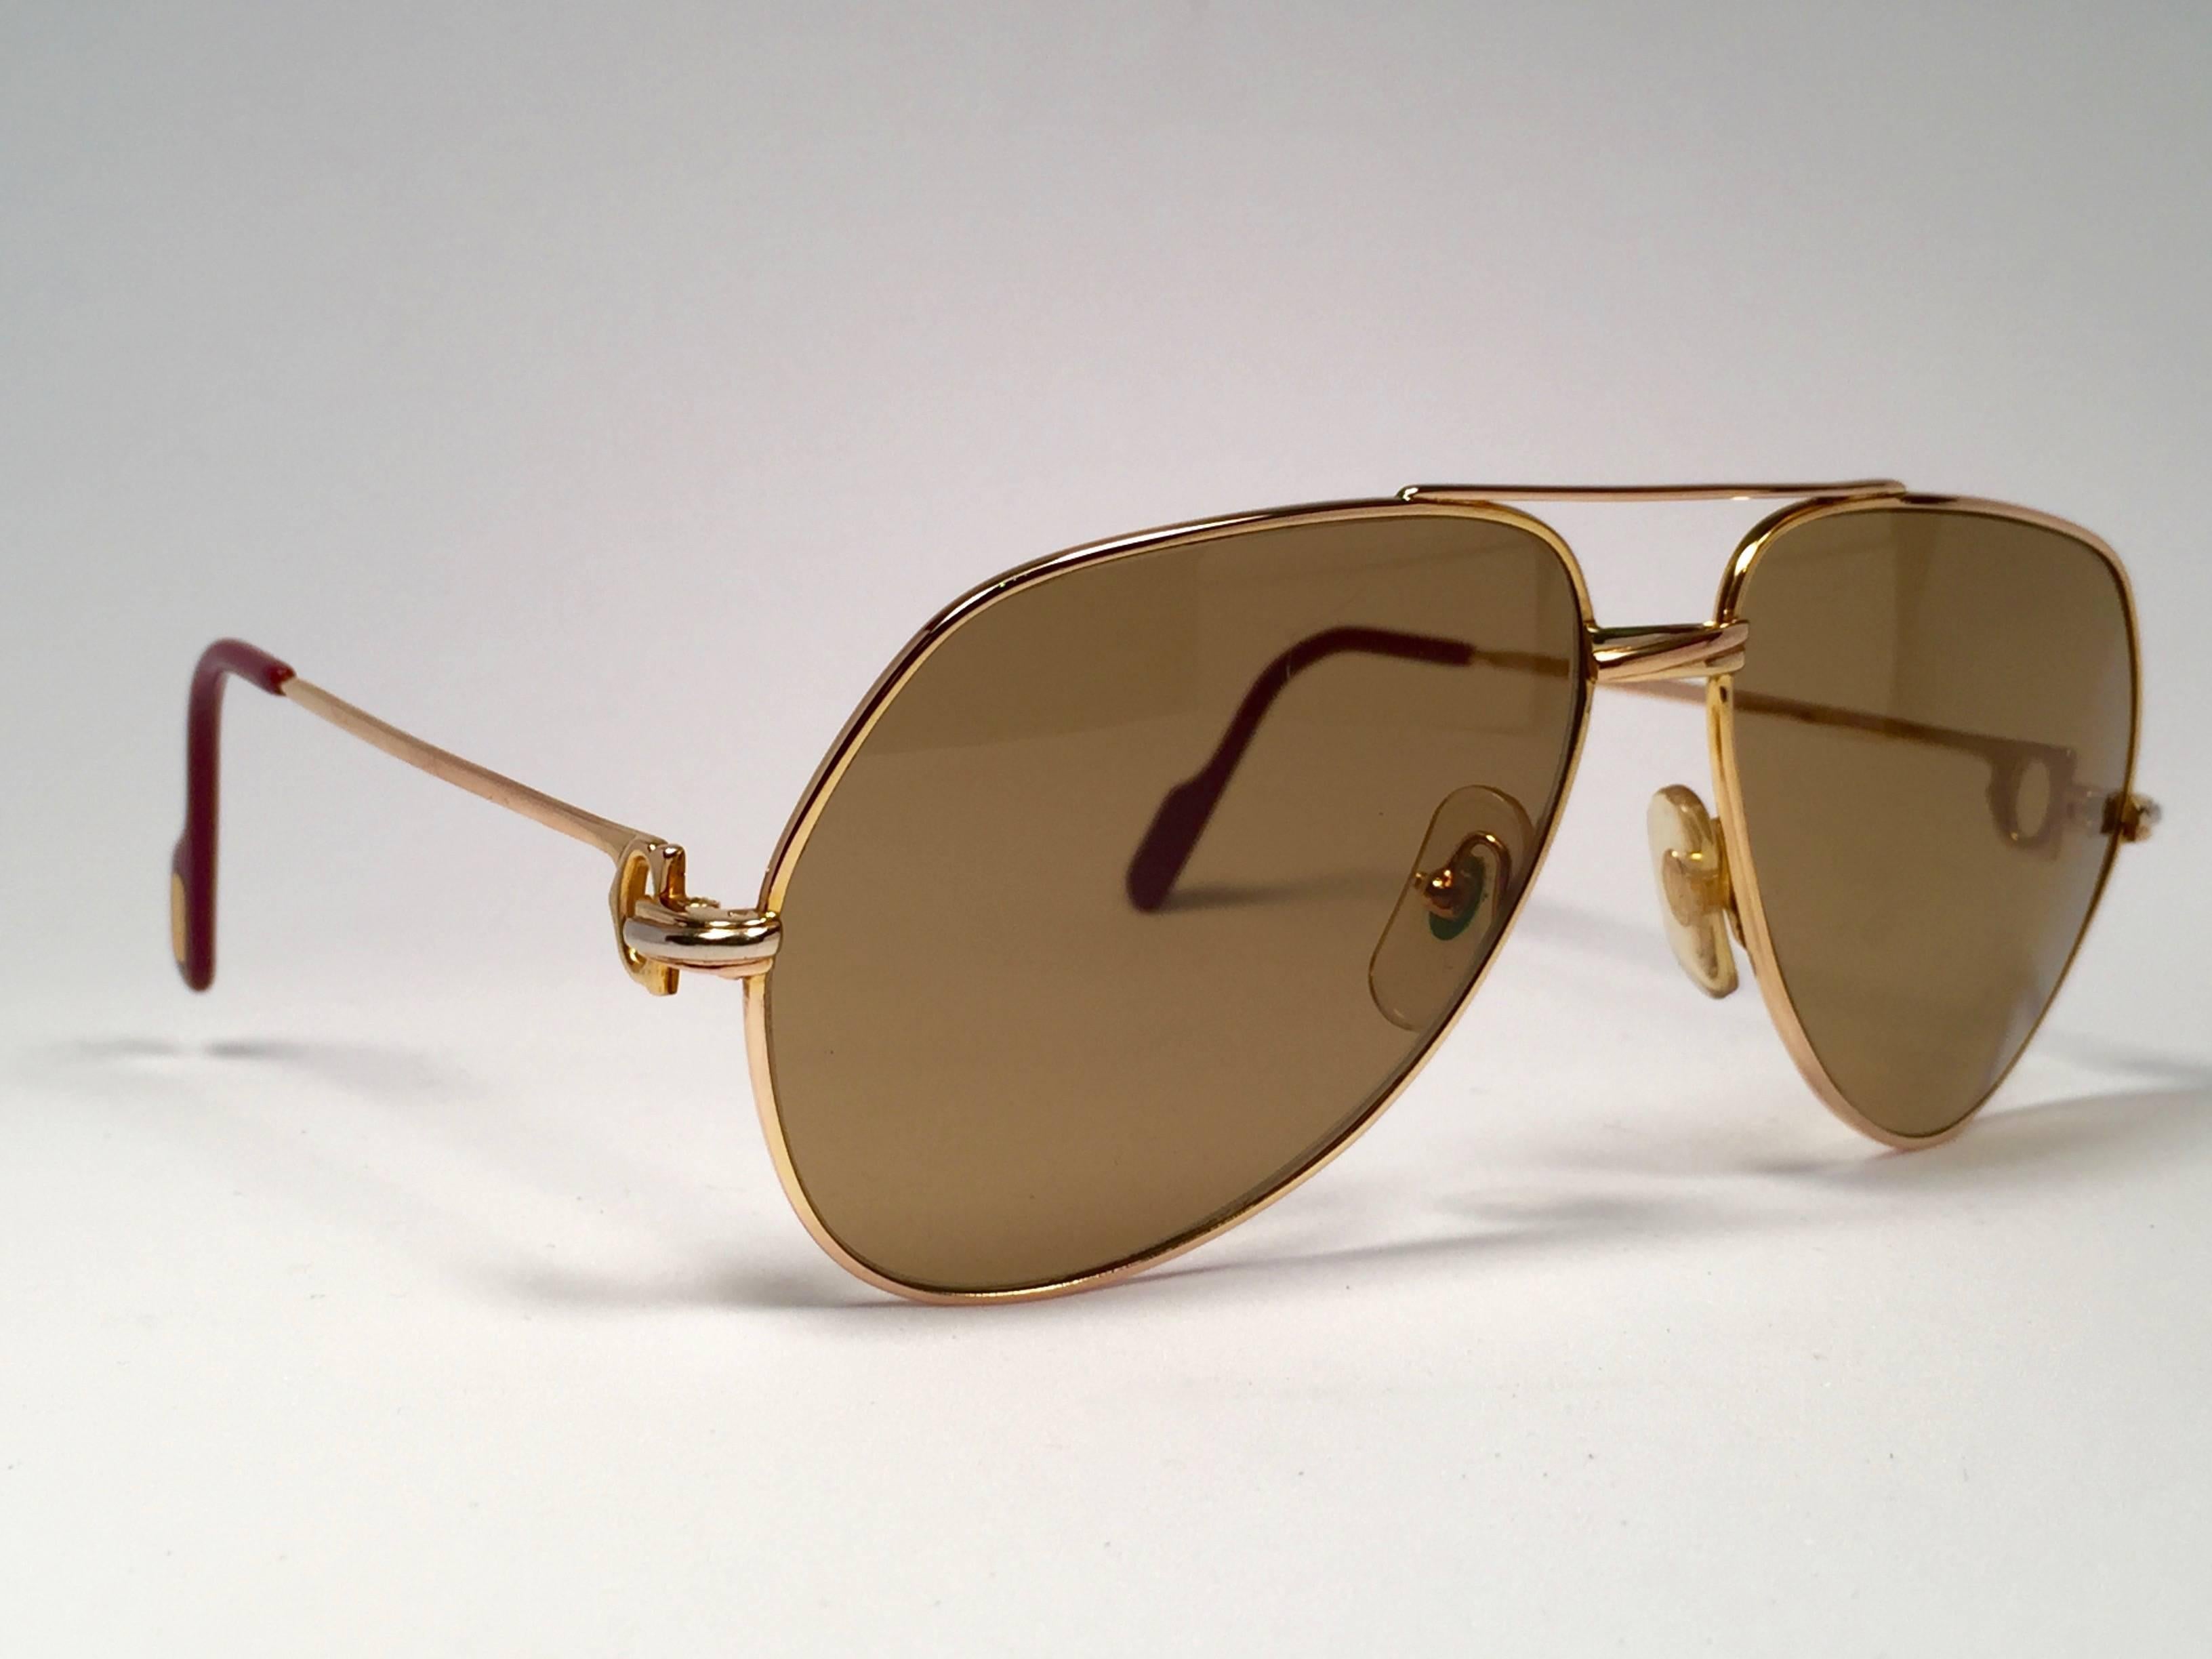 New Cartier Ultra Rare Vendome 18K 750 Gold Filled Sunglasses Made in France 1